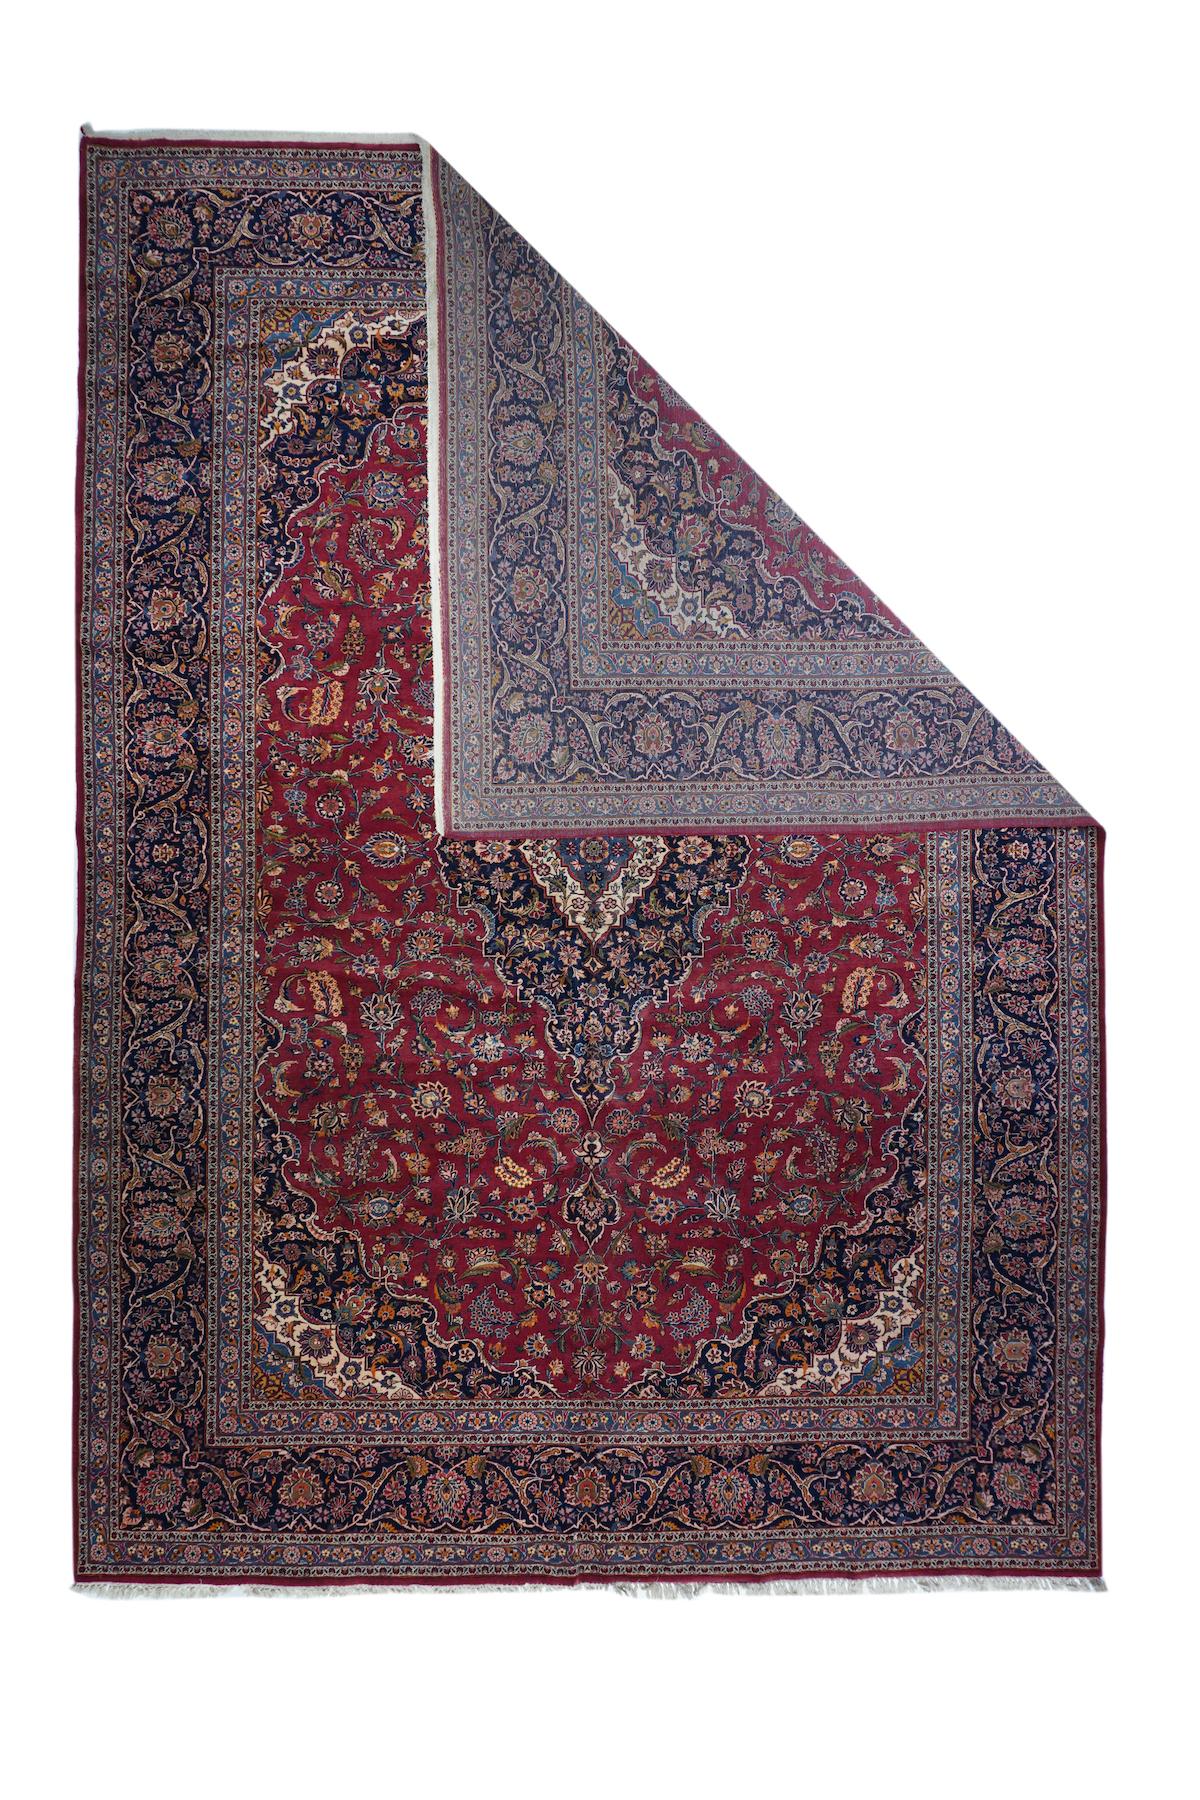 Vintage Kashan rug 10'4'' x 14'. This well-woven room size from a famous carpt-weaving centre, shows a blood red field closely hosting a variety of medium-scale palmettes, moving around the navy medallion with a small pattern and a cream